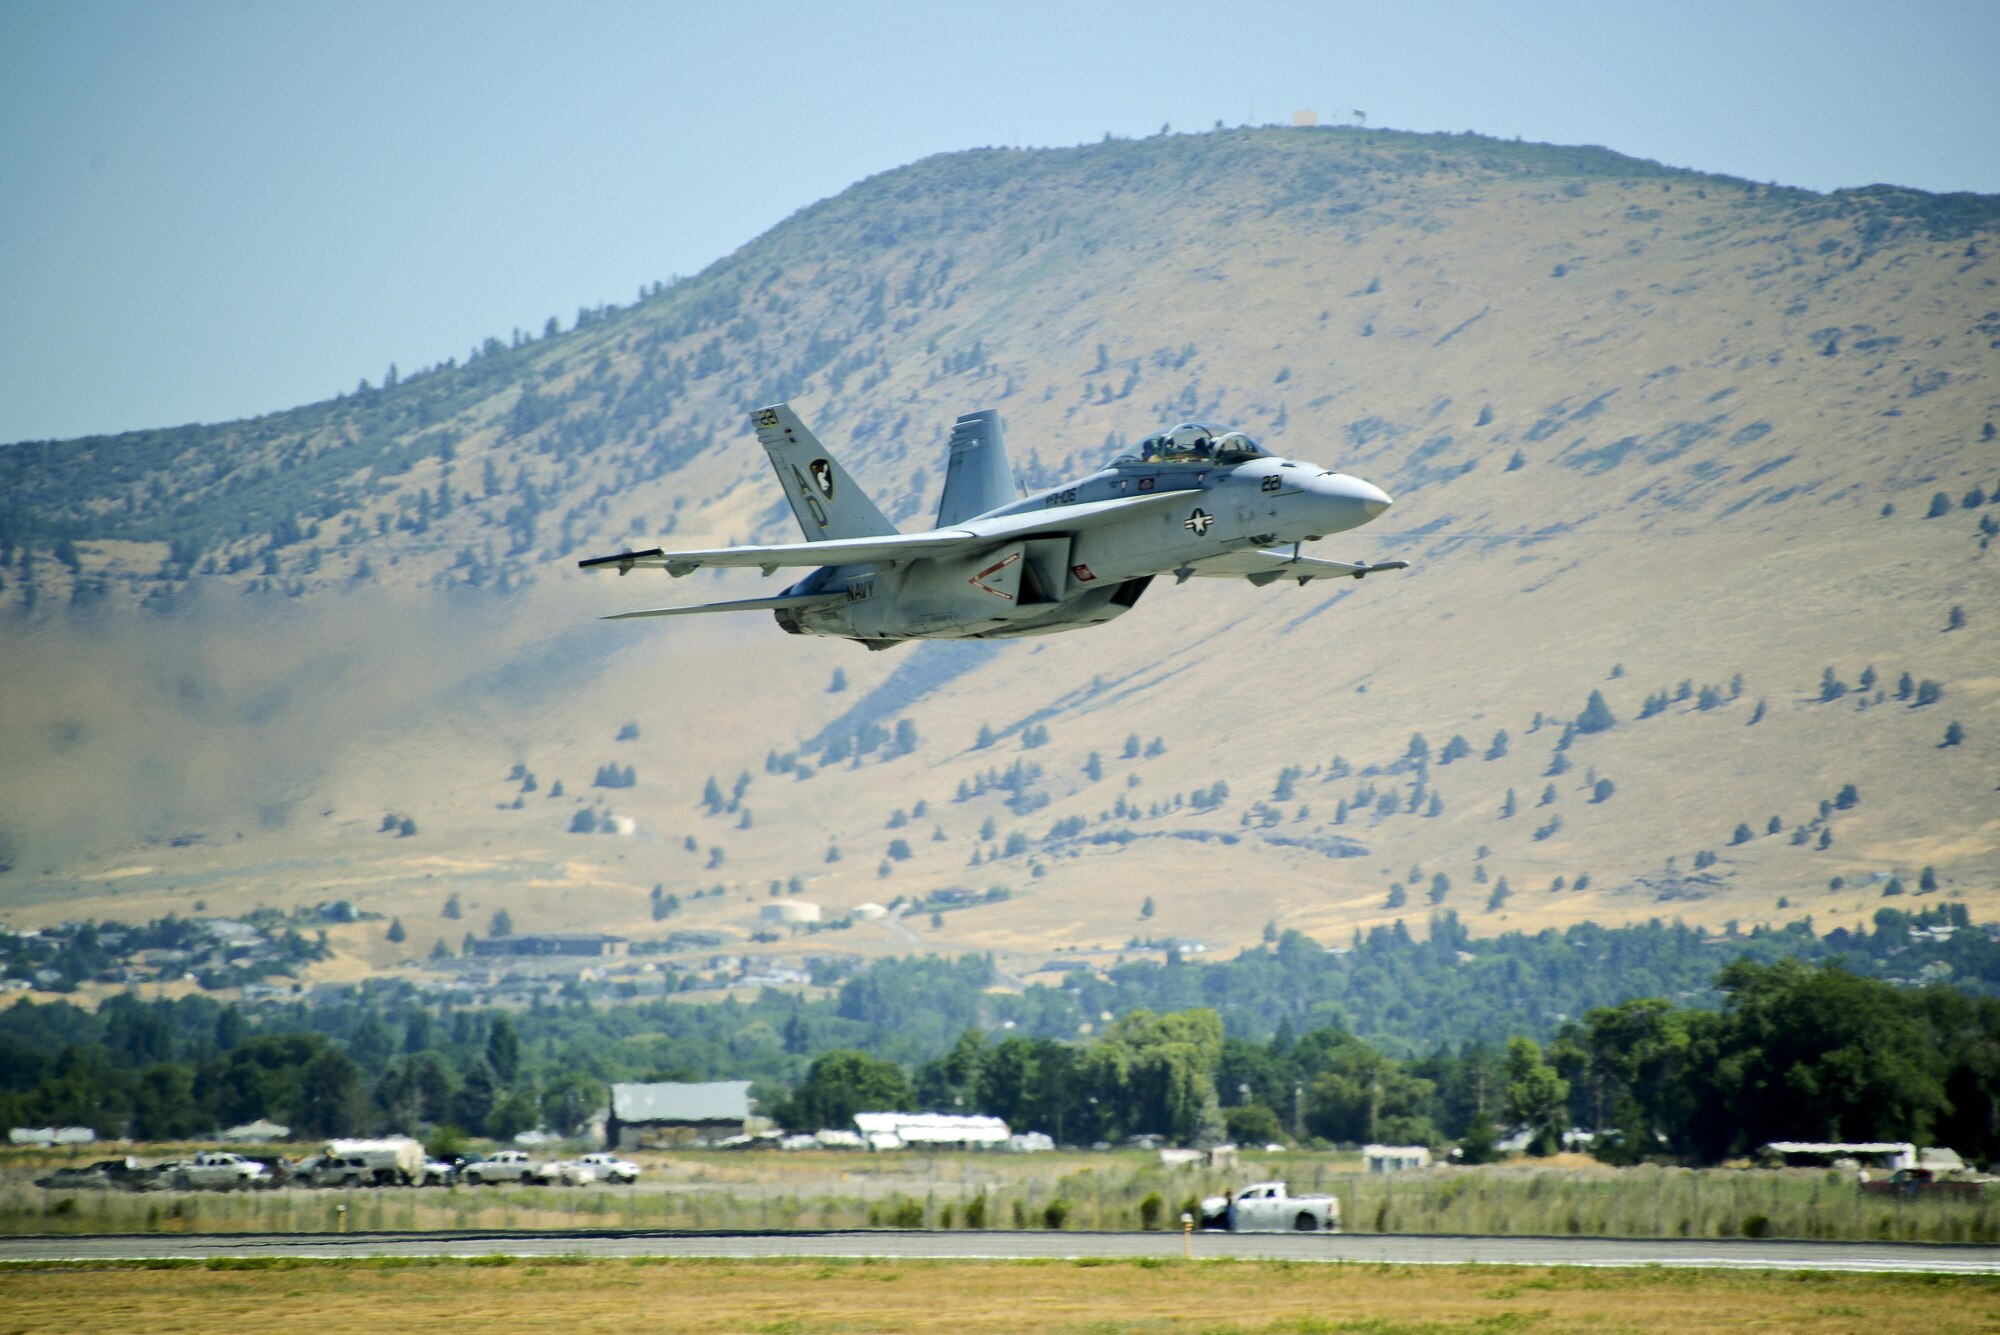 A U.S. Navy F/A-18 Super Hornet from VFA-106 TAC DEMO team, Naval Air Station Oceana, Virginia, flies over Kingsley Field during an aerial demonstration during the Sentry Eagle open house July 22, 2017, in Klamath Falls, Ore. Sentry Eagle is a four day large force exercise that is hosted by the 173rd Fighter Wing. The exercise brings together different aircraft and units from around the country for dissimilar air combat training. Additionally, the wing opens its gates to the public for a day during their biennial open house. (U.S. Air National Guard photo by Staff Sgt. Riley Johnson)